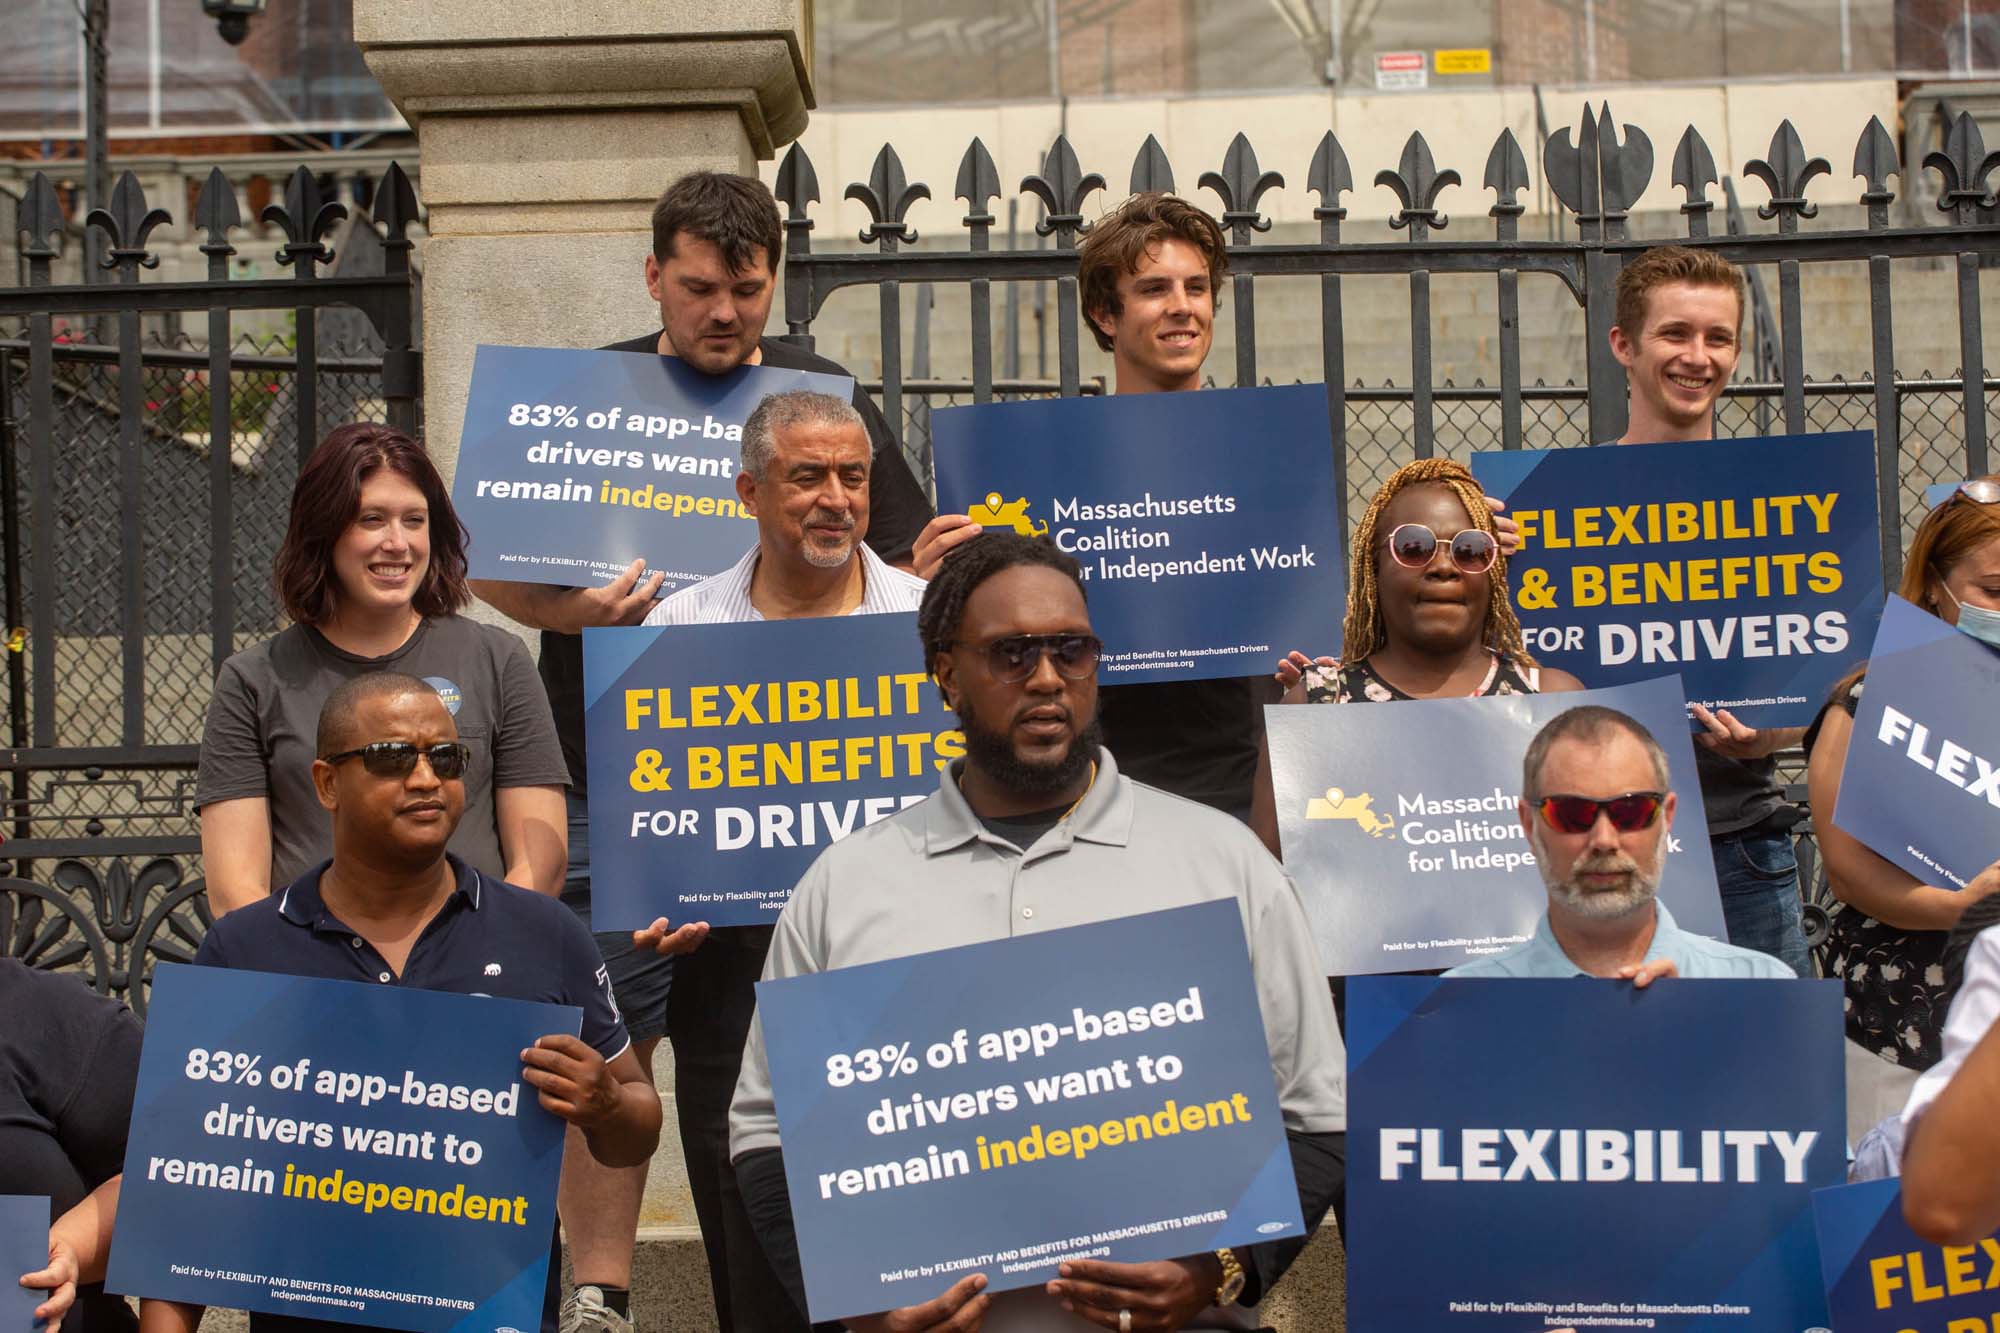 Supporters of flexibility and independence for drivers rally at Massachusetts State House.